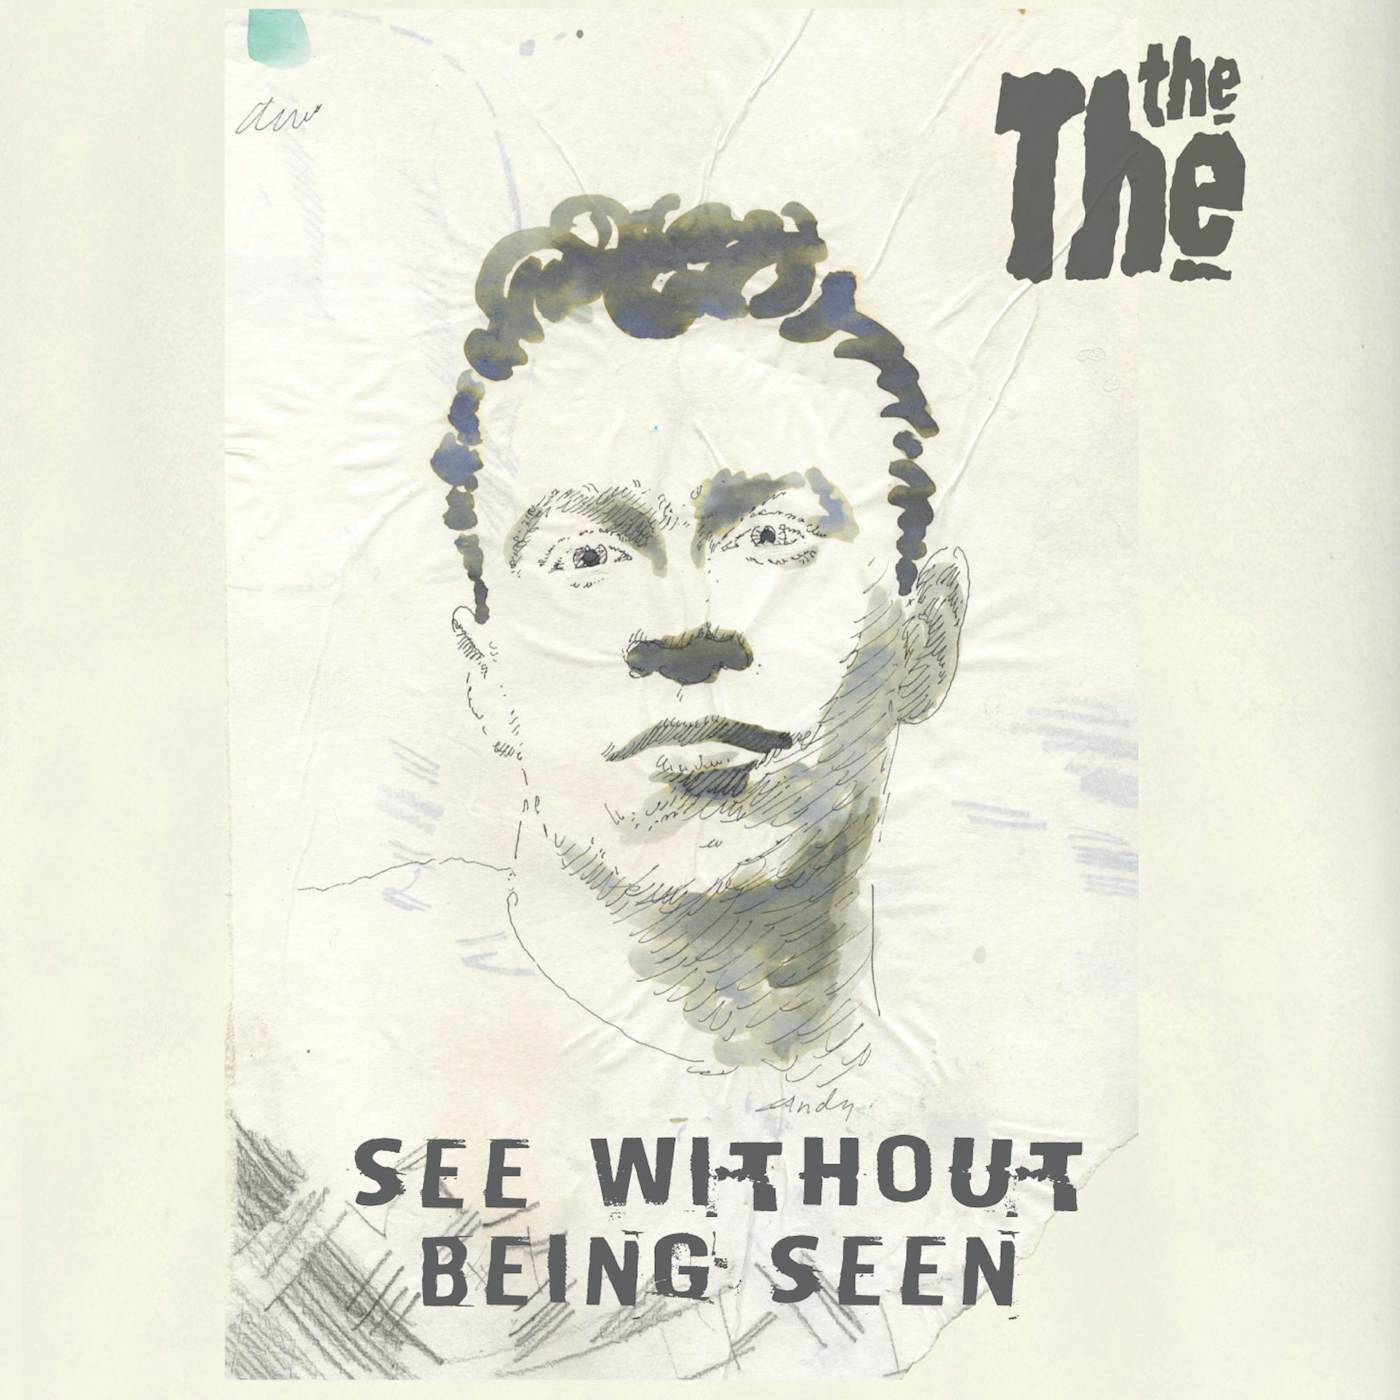 The The See Without Being Seen CD